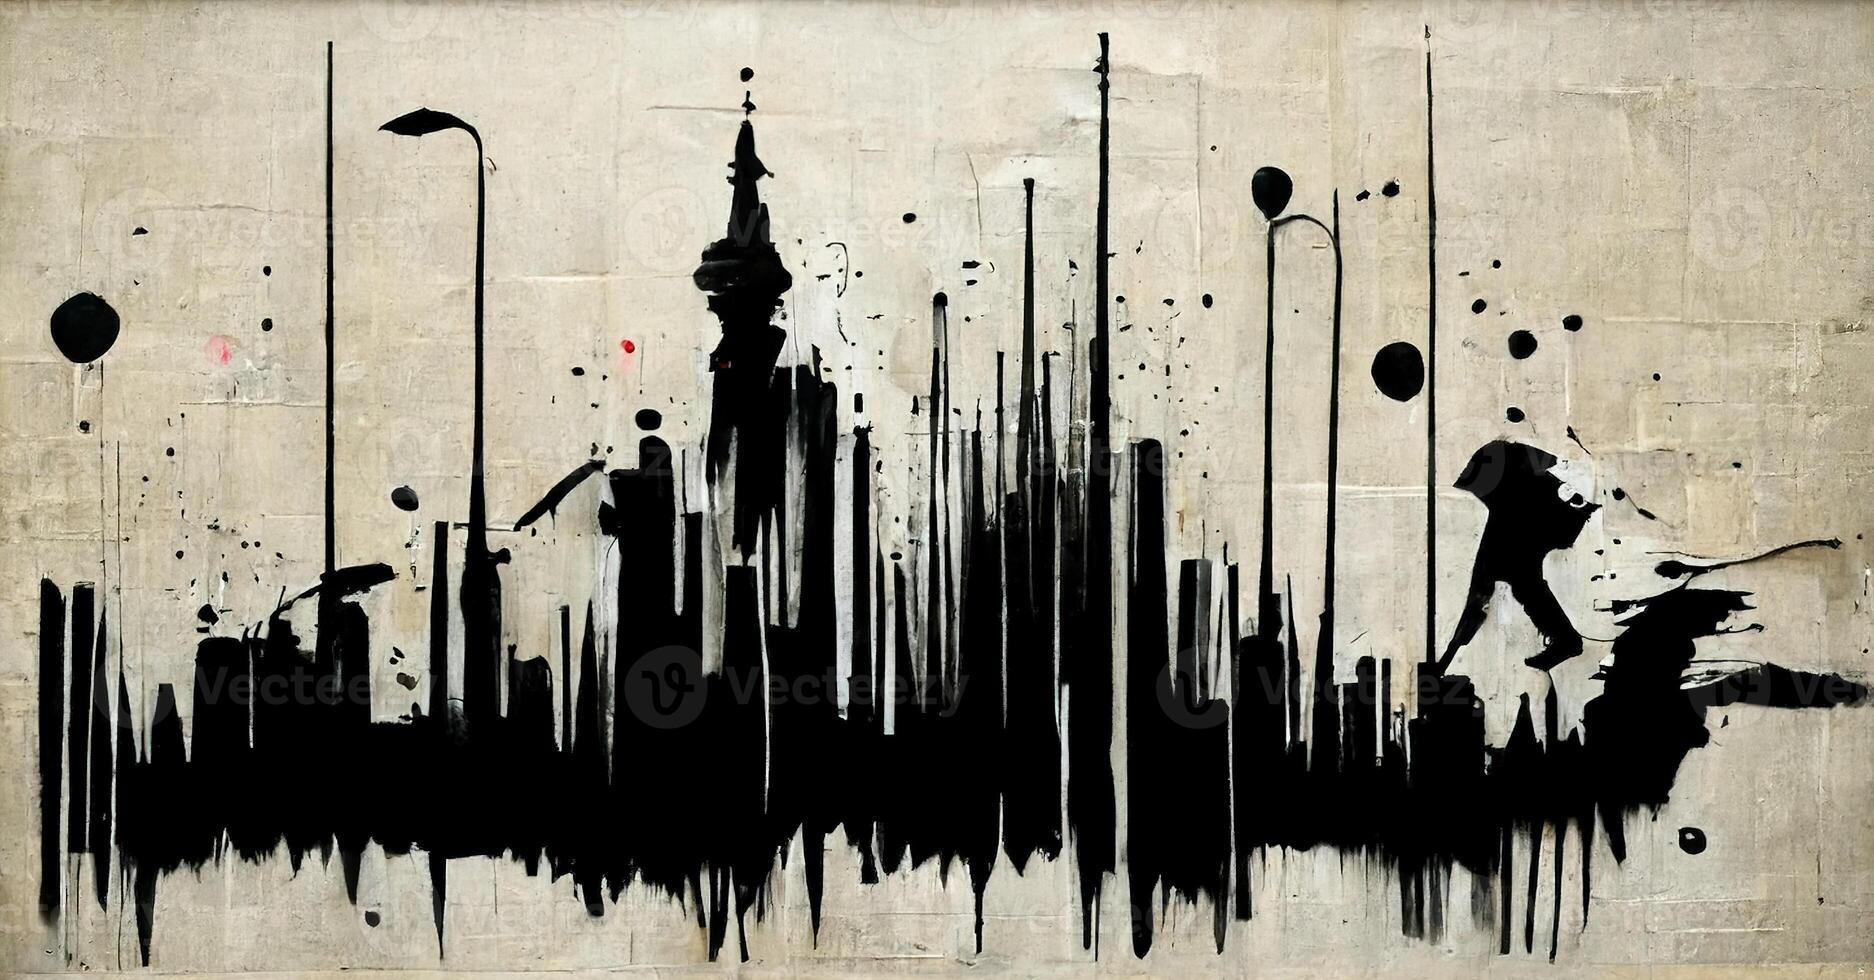 , Ink black street graffiti art on a textured paper vintage background, inspired by Banksy. photo